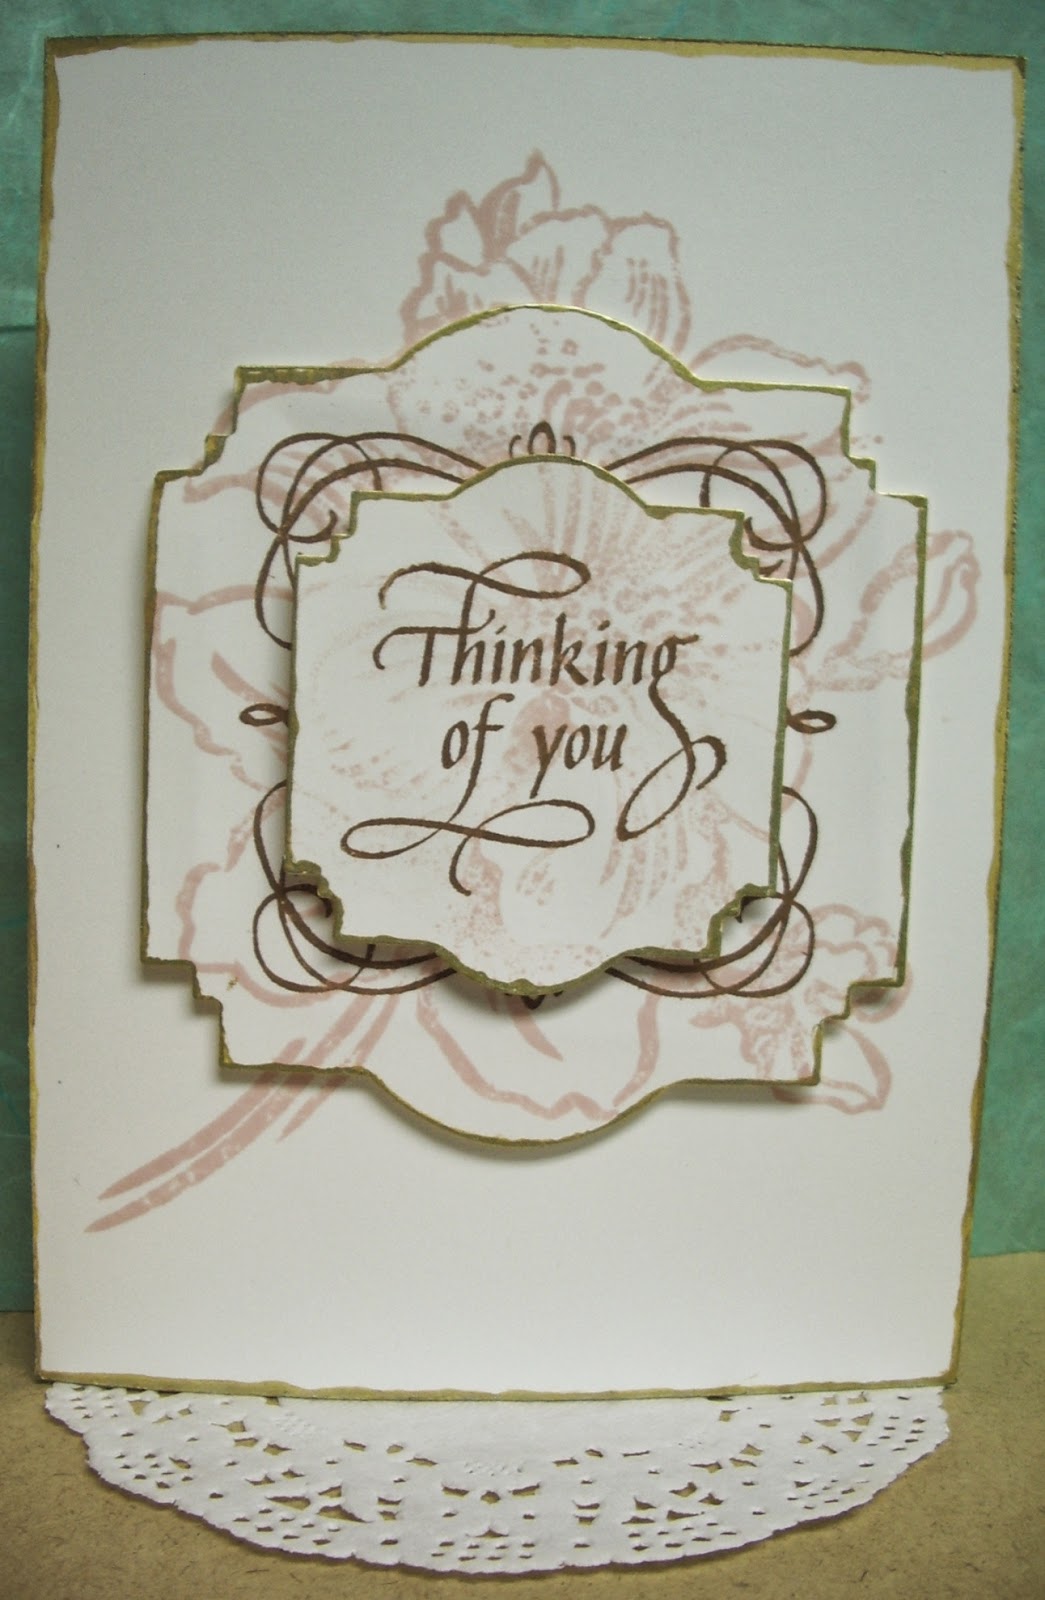 Craftygal's Creations: Tuesday Winsday inspired - Thinking of you Card